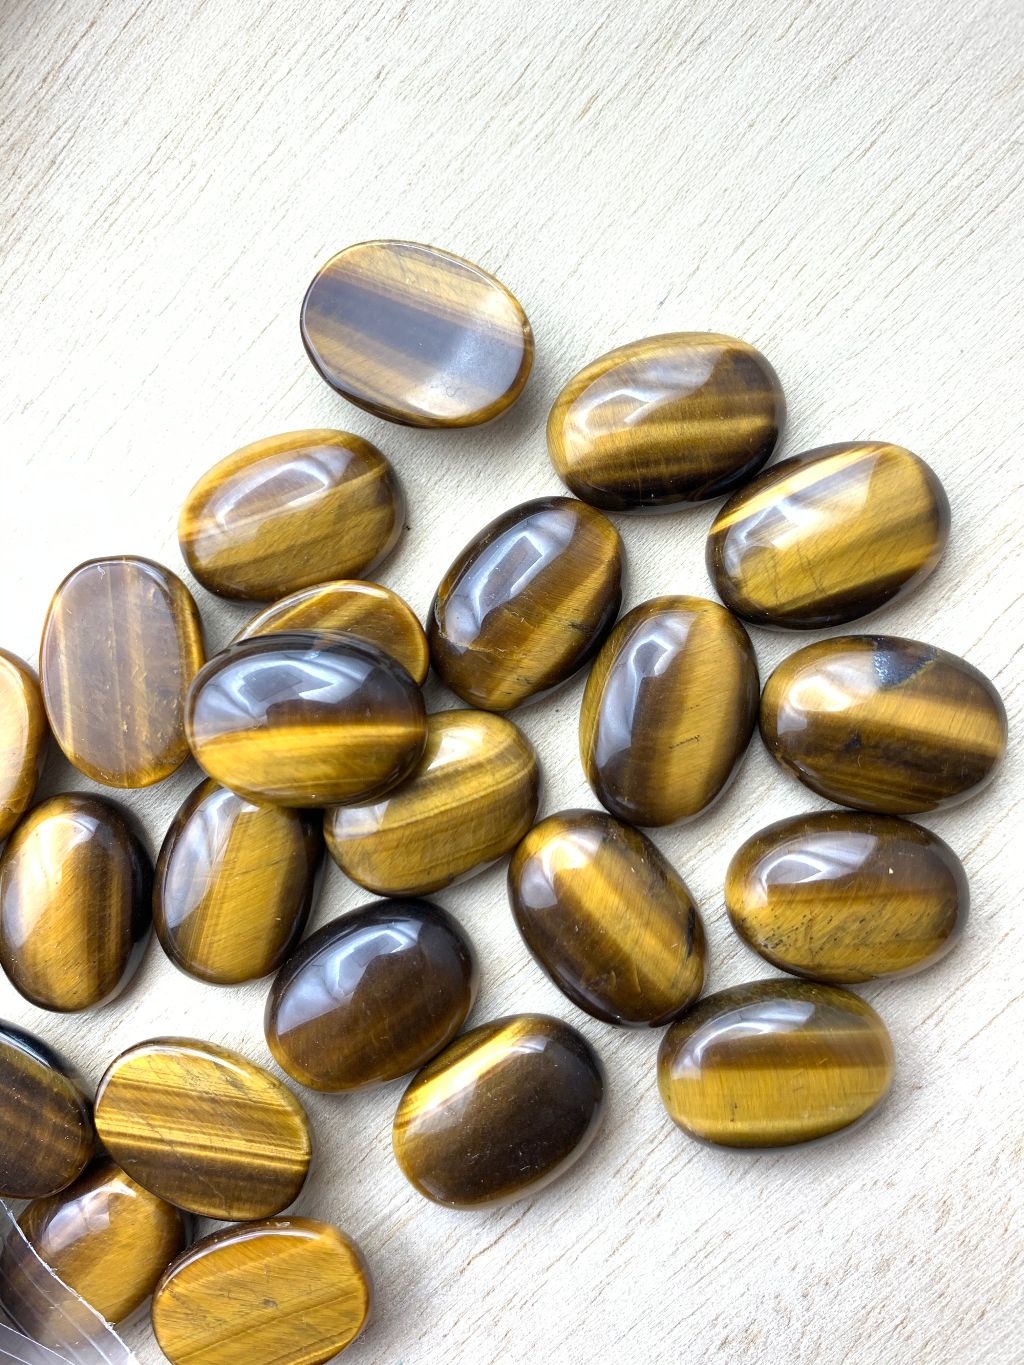 7994 Tiger's Eye 13x18mm Cabochons Set of 2 with 7mm dome From Africa 